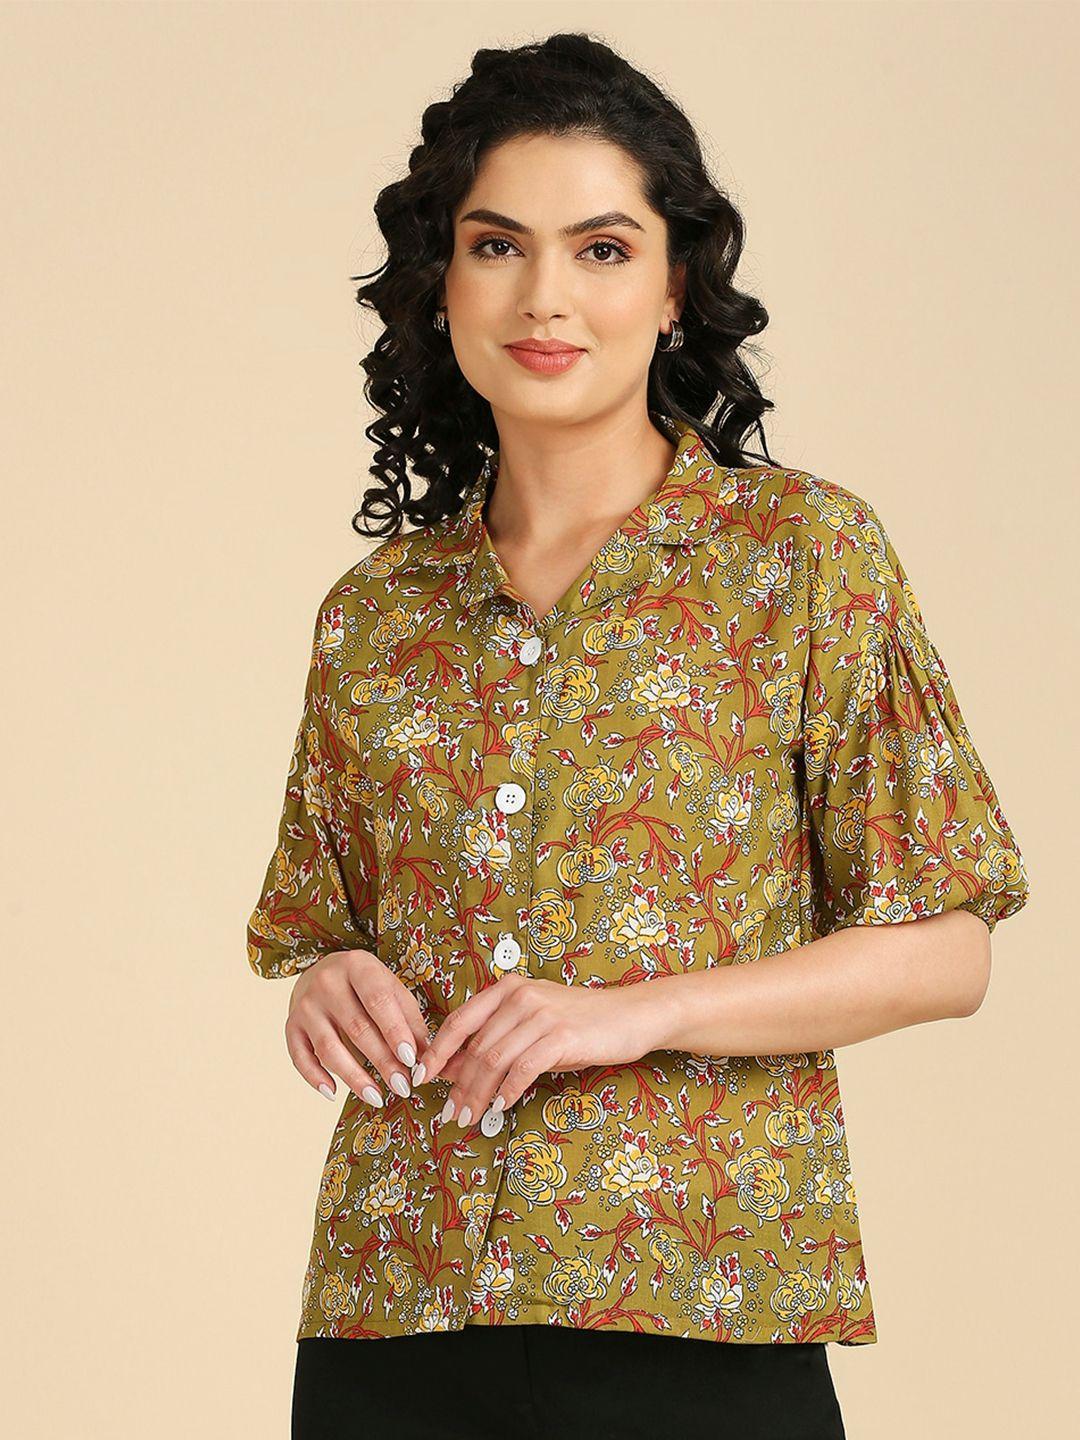 gufrina olive green floral print cotton shirt style top